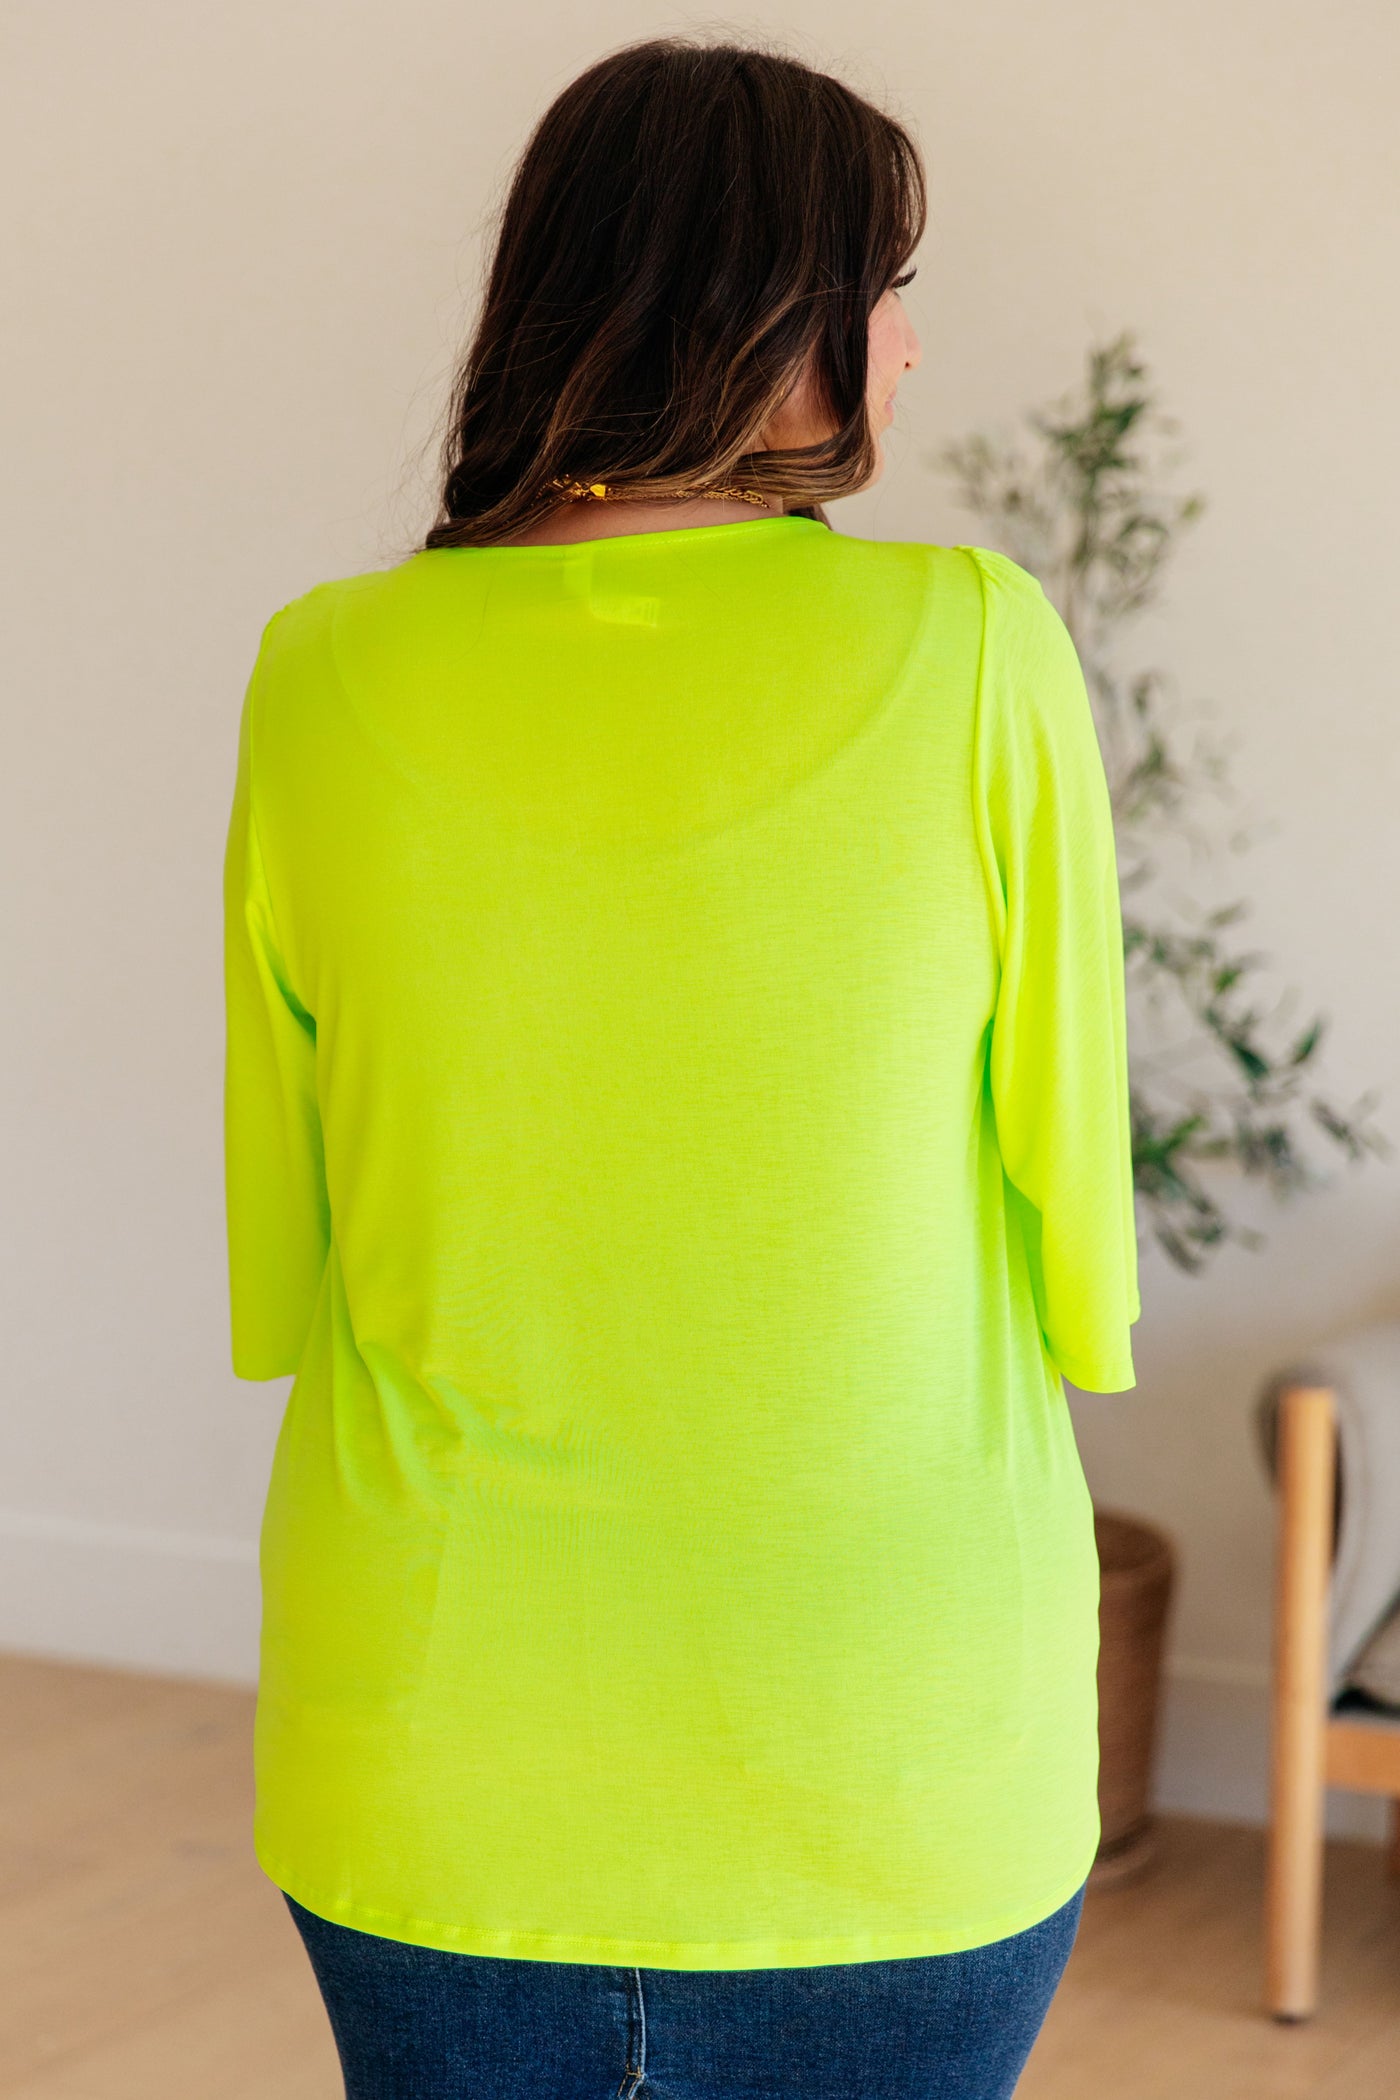 Cali Blouse in Neon Green Southern Soul Collectives